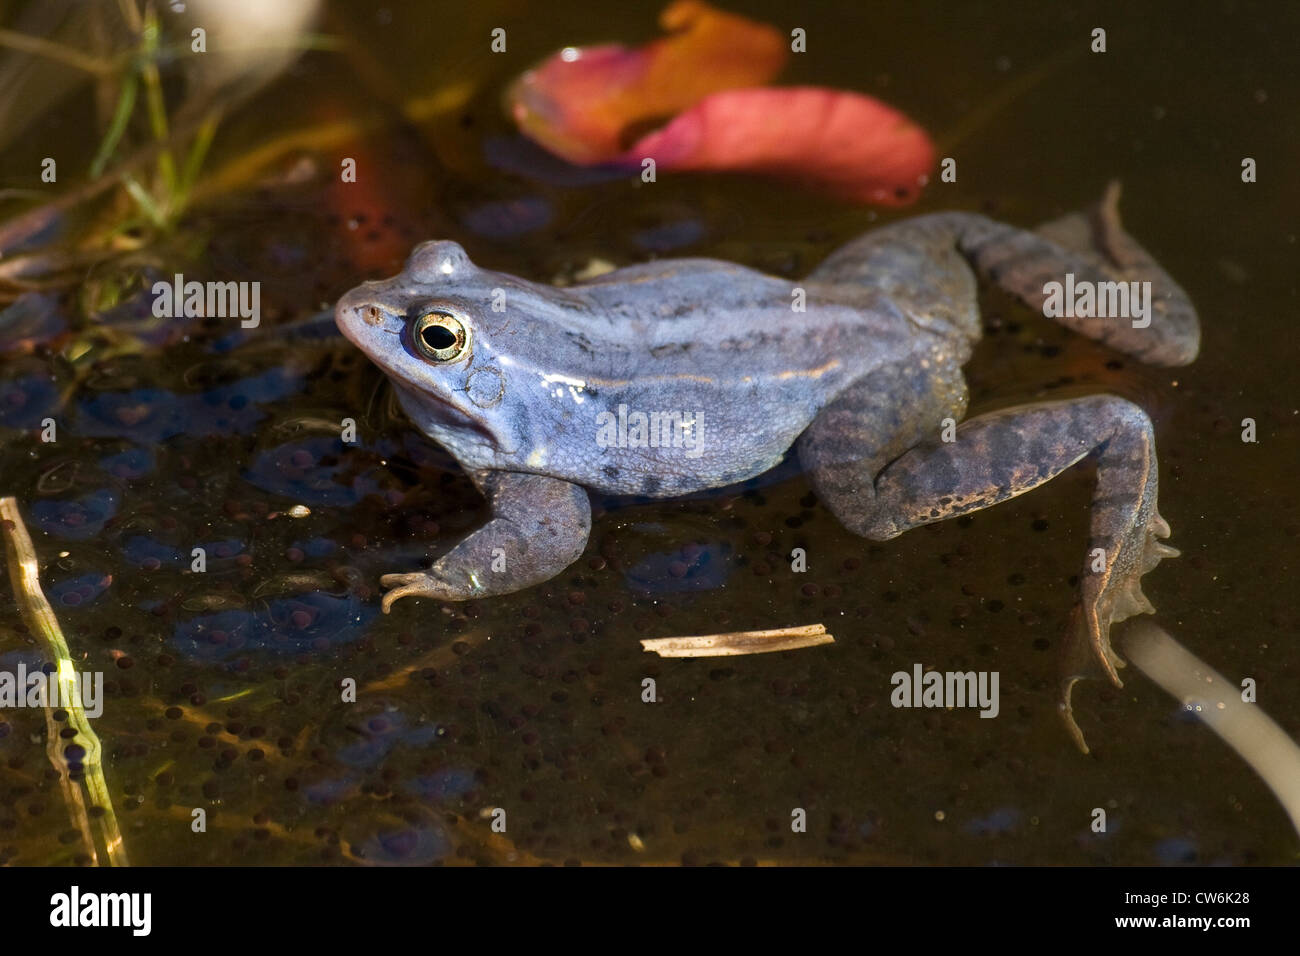 moor frog (Rana arvalis), male at mating season coloured intensely blue sitting on spawn clump, Germany Stock Photo